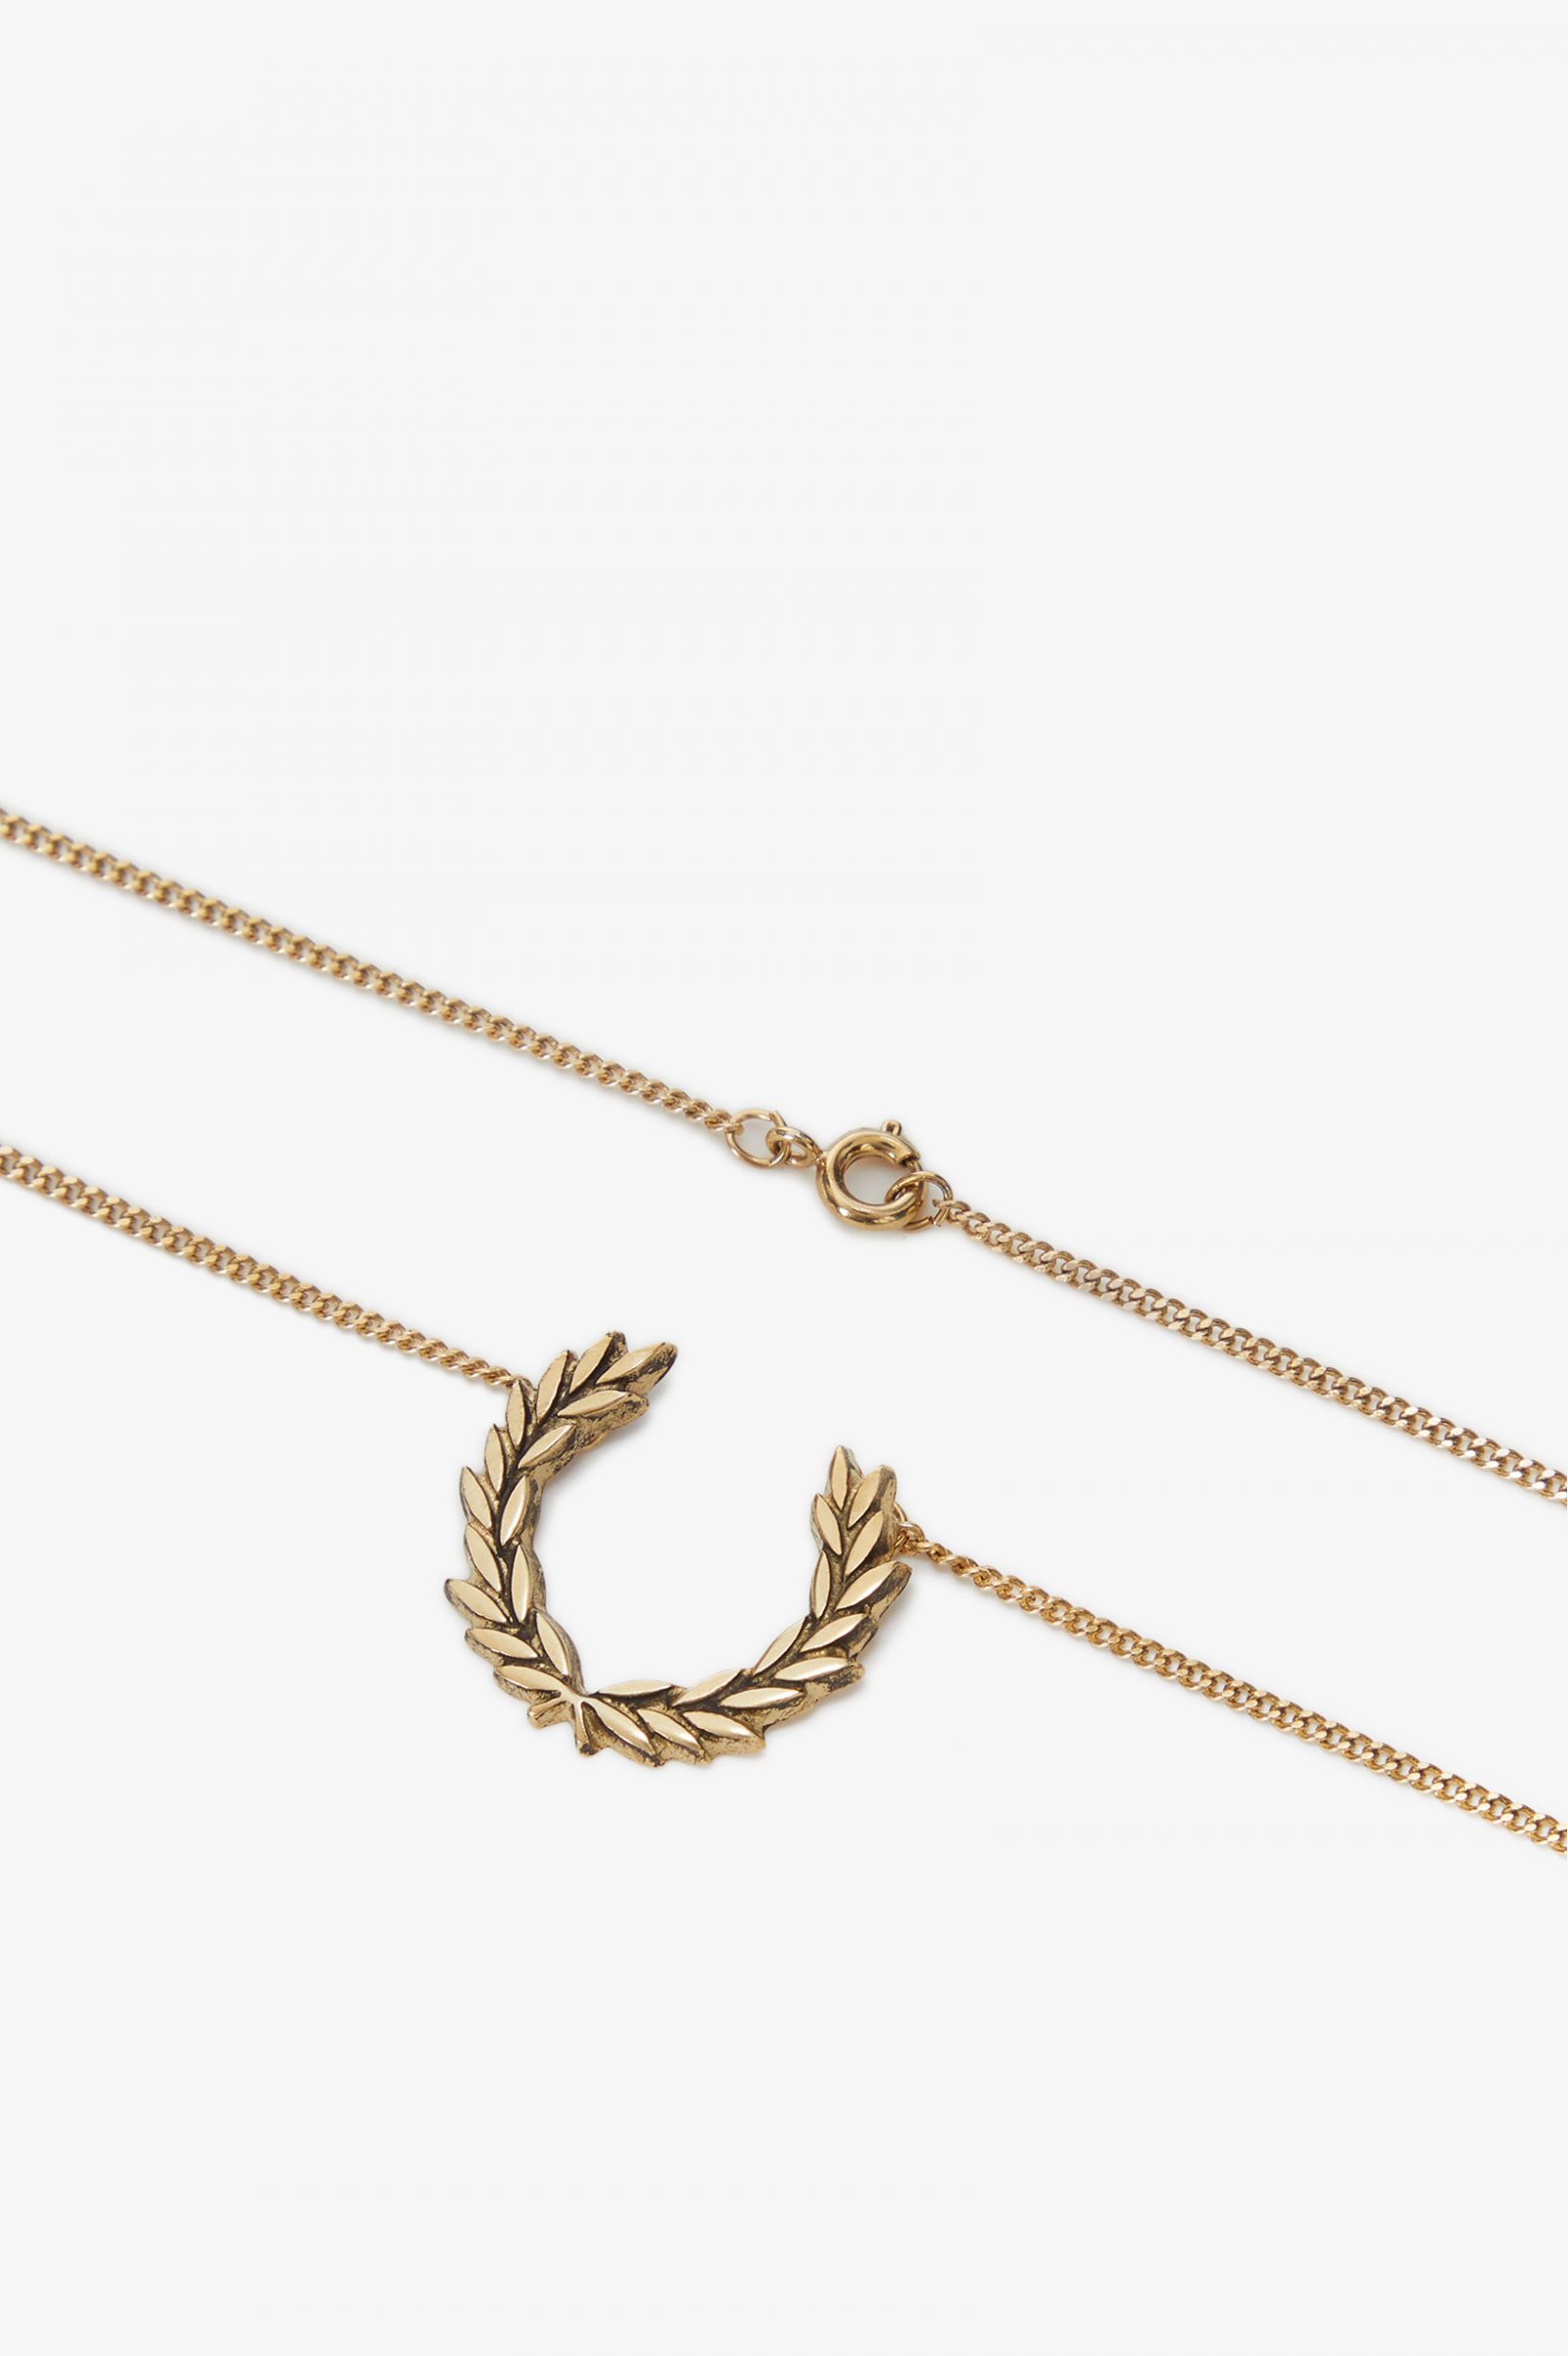 Laurel Wreath Necklace - Gold | Men's Accessories | Hats, Leather & Socks | Fred Perry UK